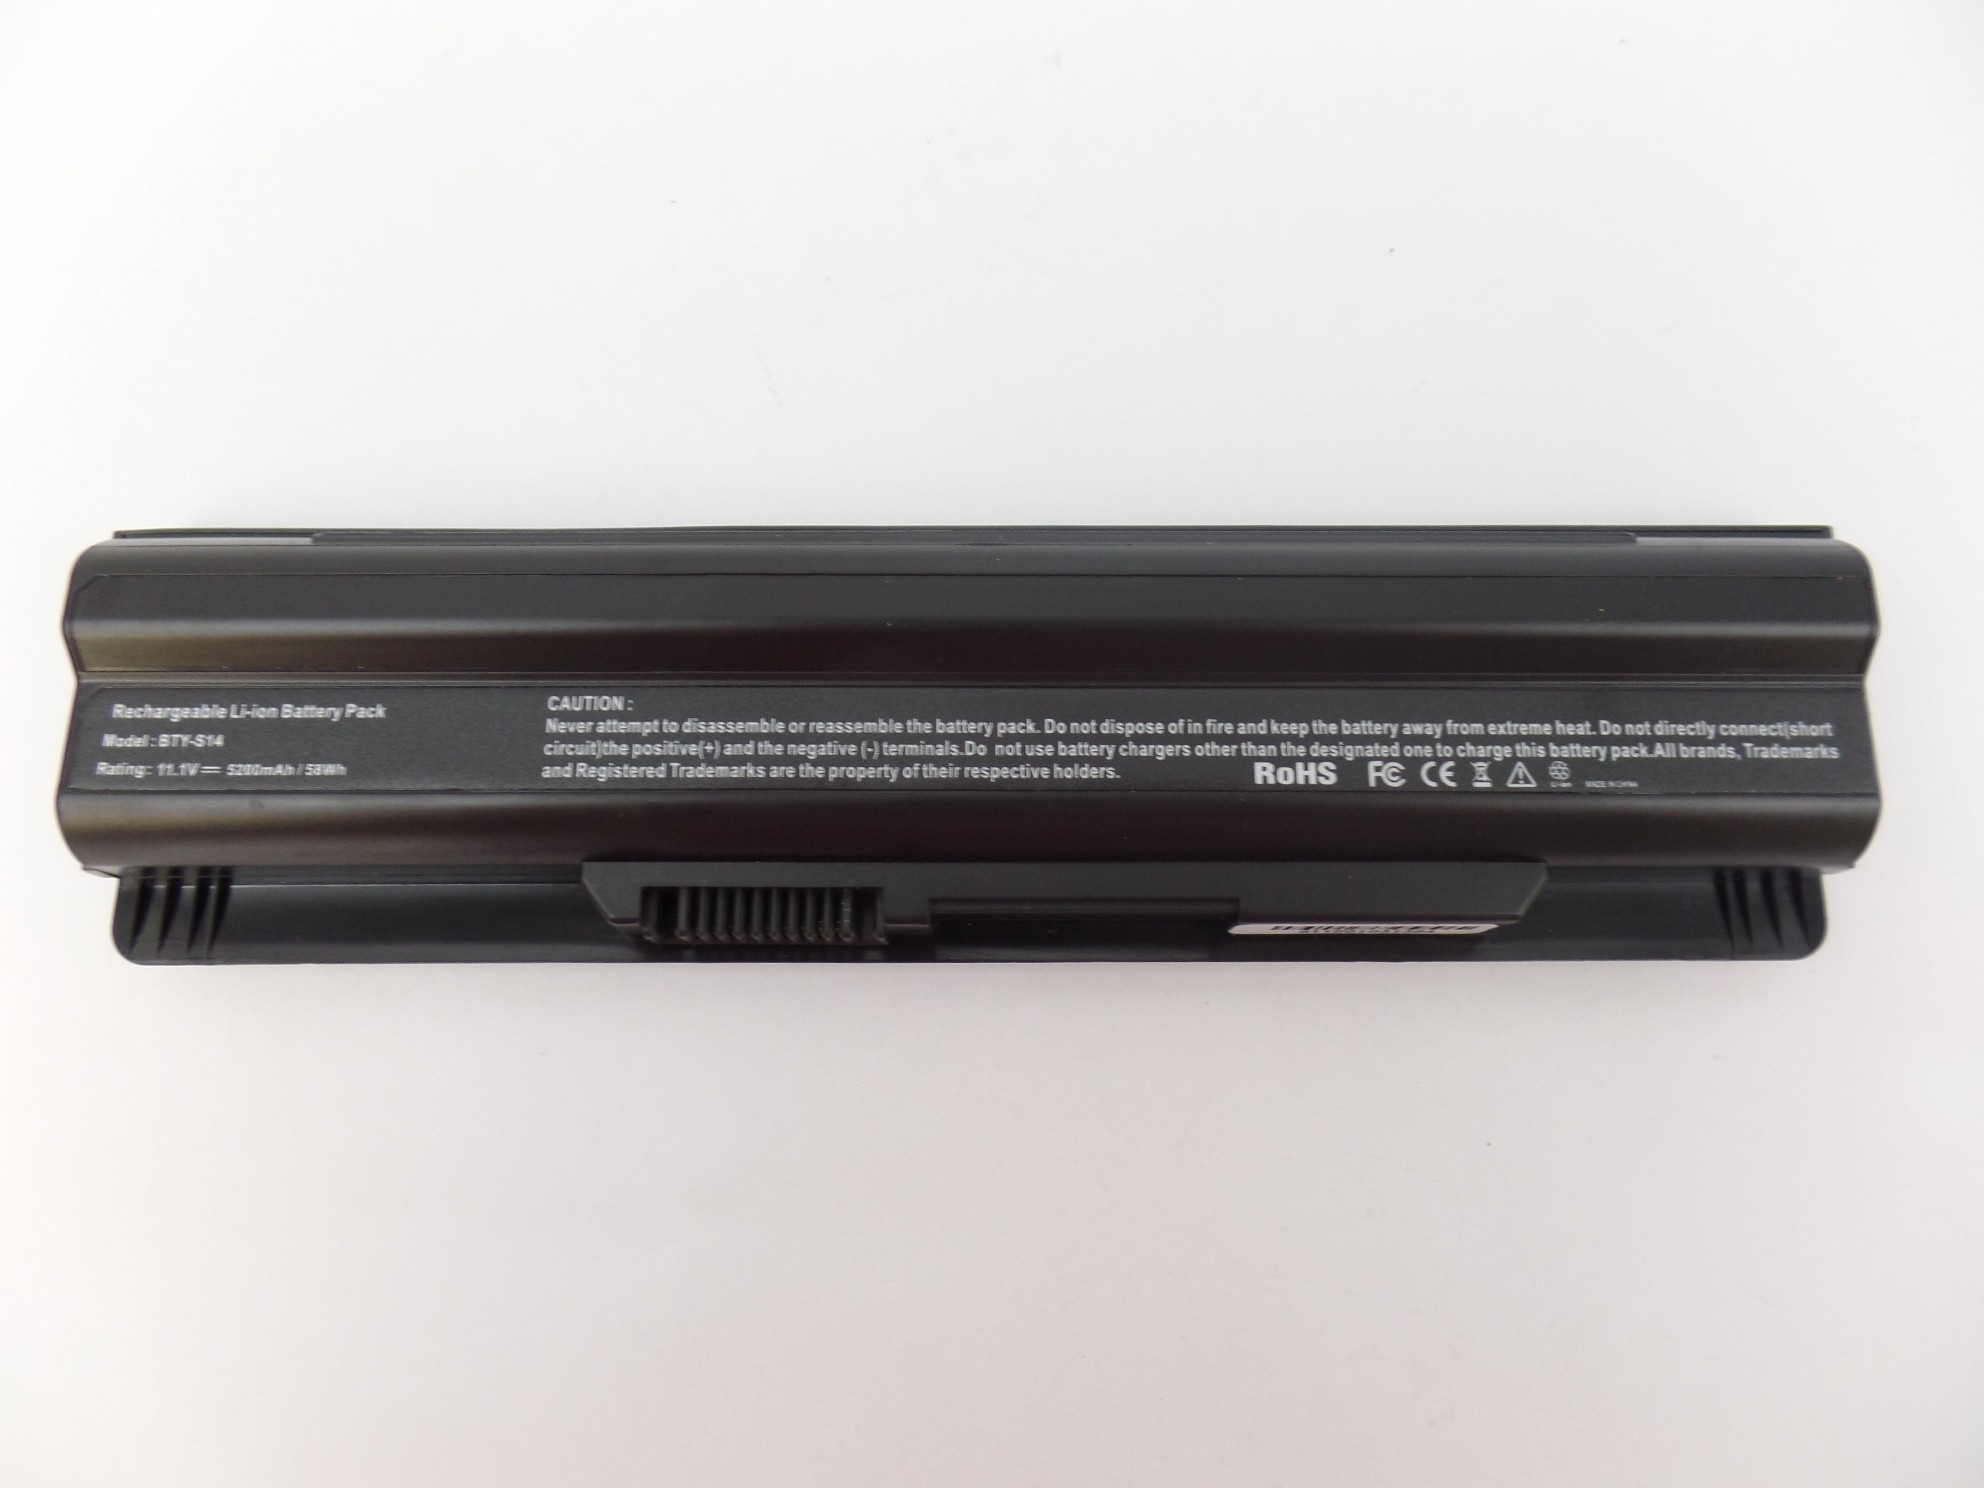 Battery For MSI GE60 GE70 CR41 CX61 CR70 CR650 FR400 FX420 FX600 BTY-S14 BTY-S15